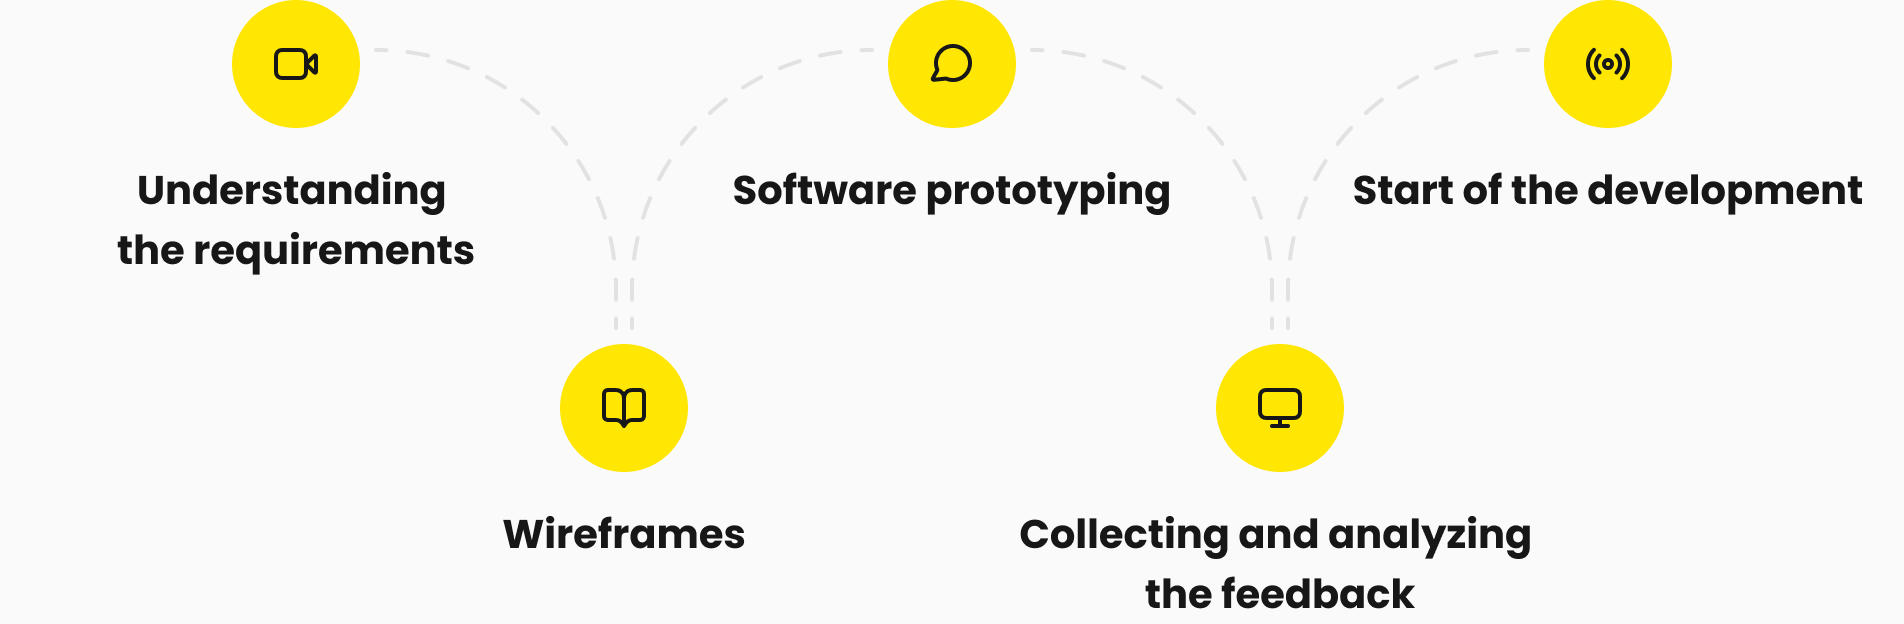 Here at Yellow, we have built up a structured prototyping process in software engineering so you can quickly reach your goals.